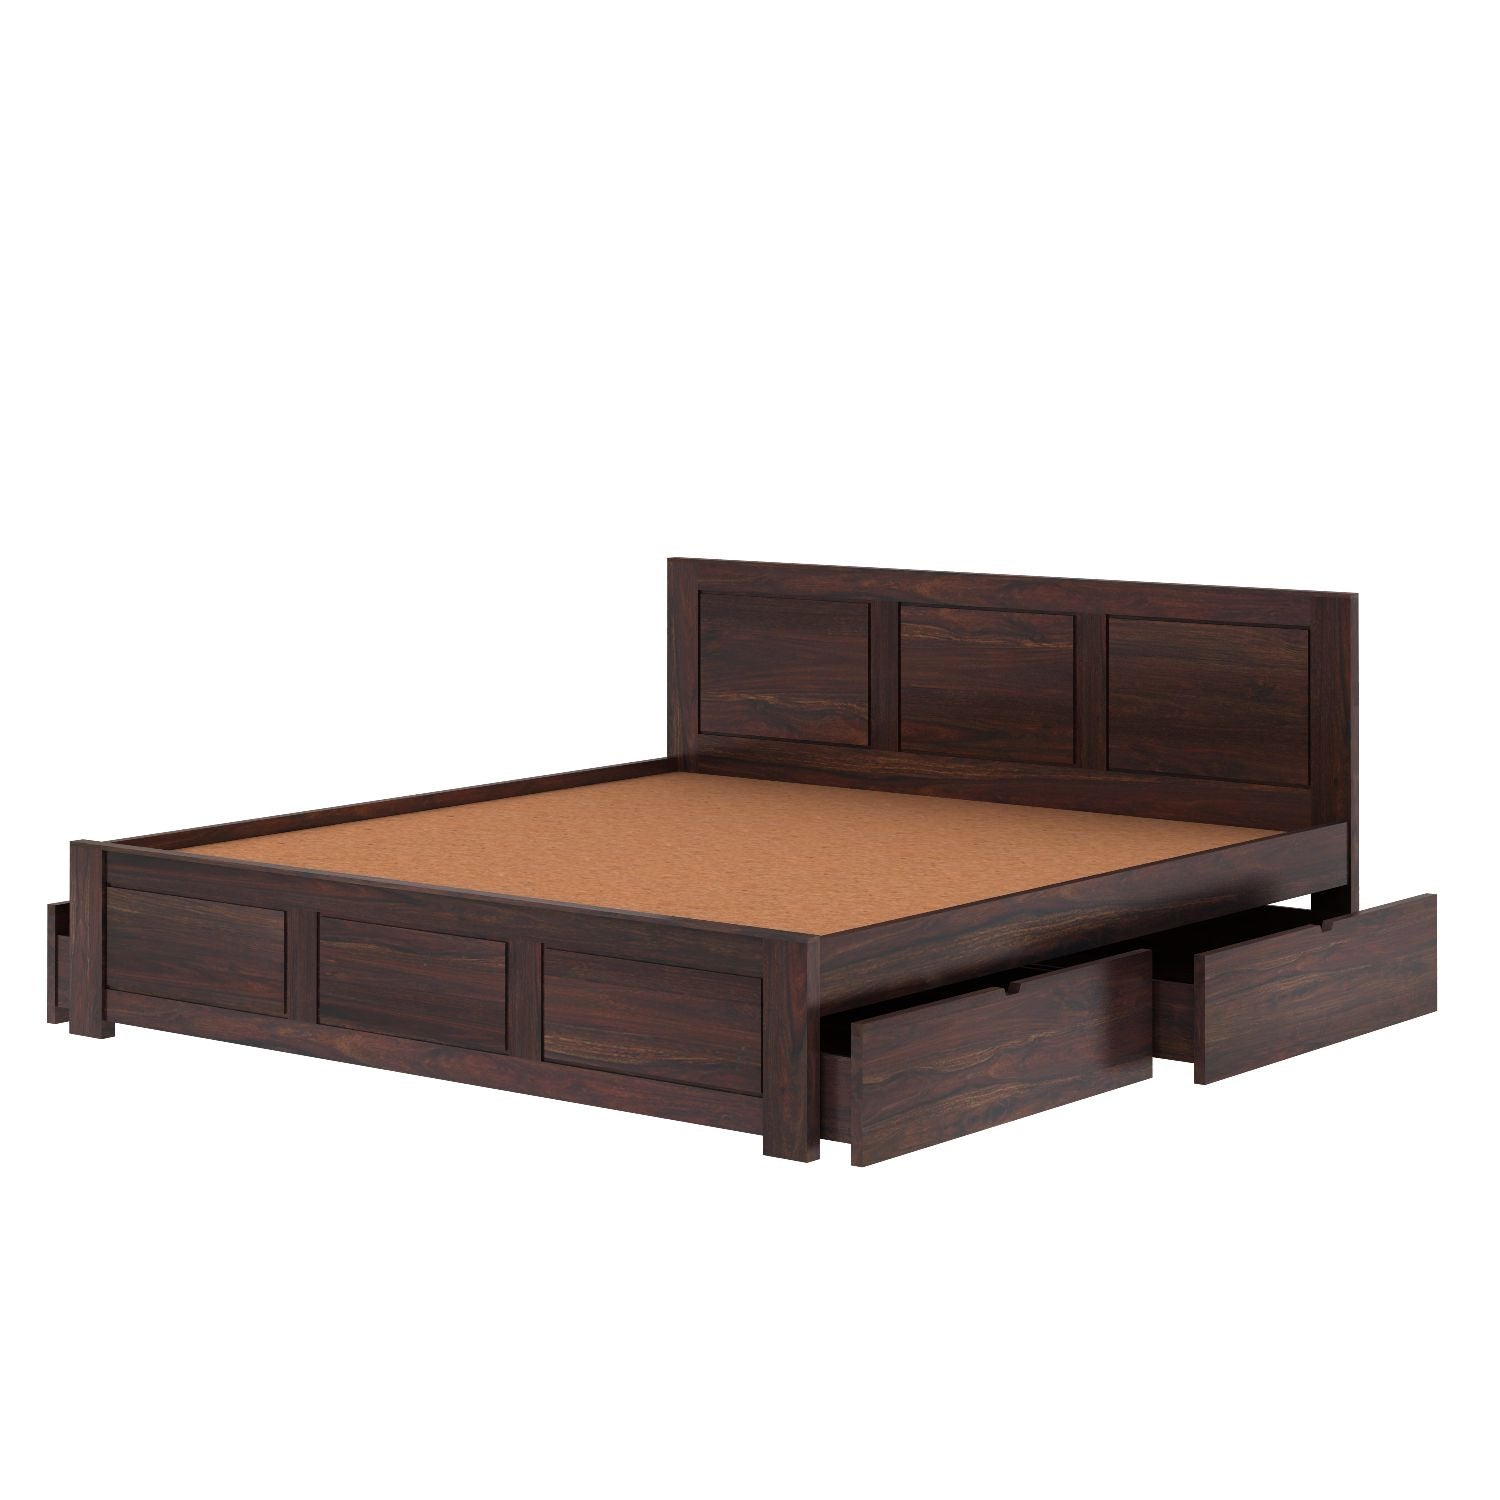 Woodwing Solid Sheesham Wood Bed With Four Drawers (Queen Size, Walnut Finish)